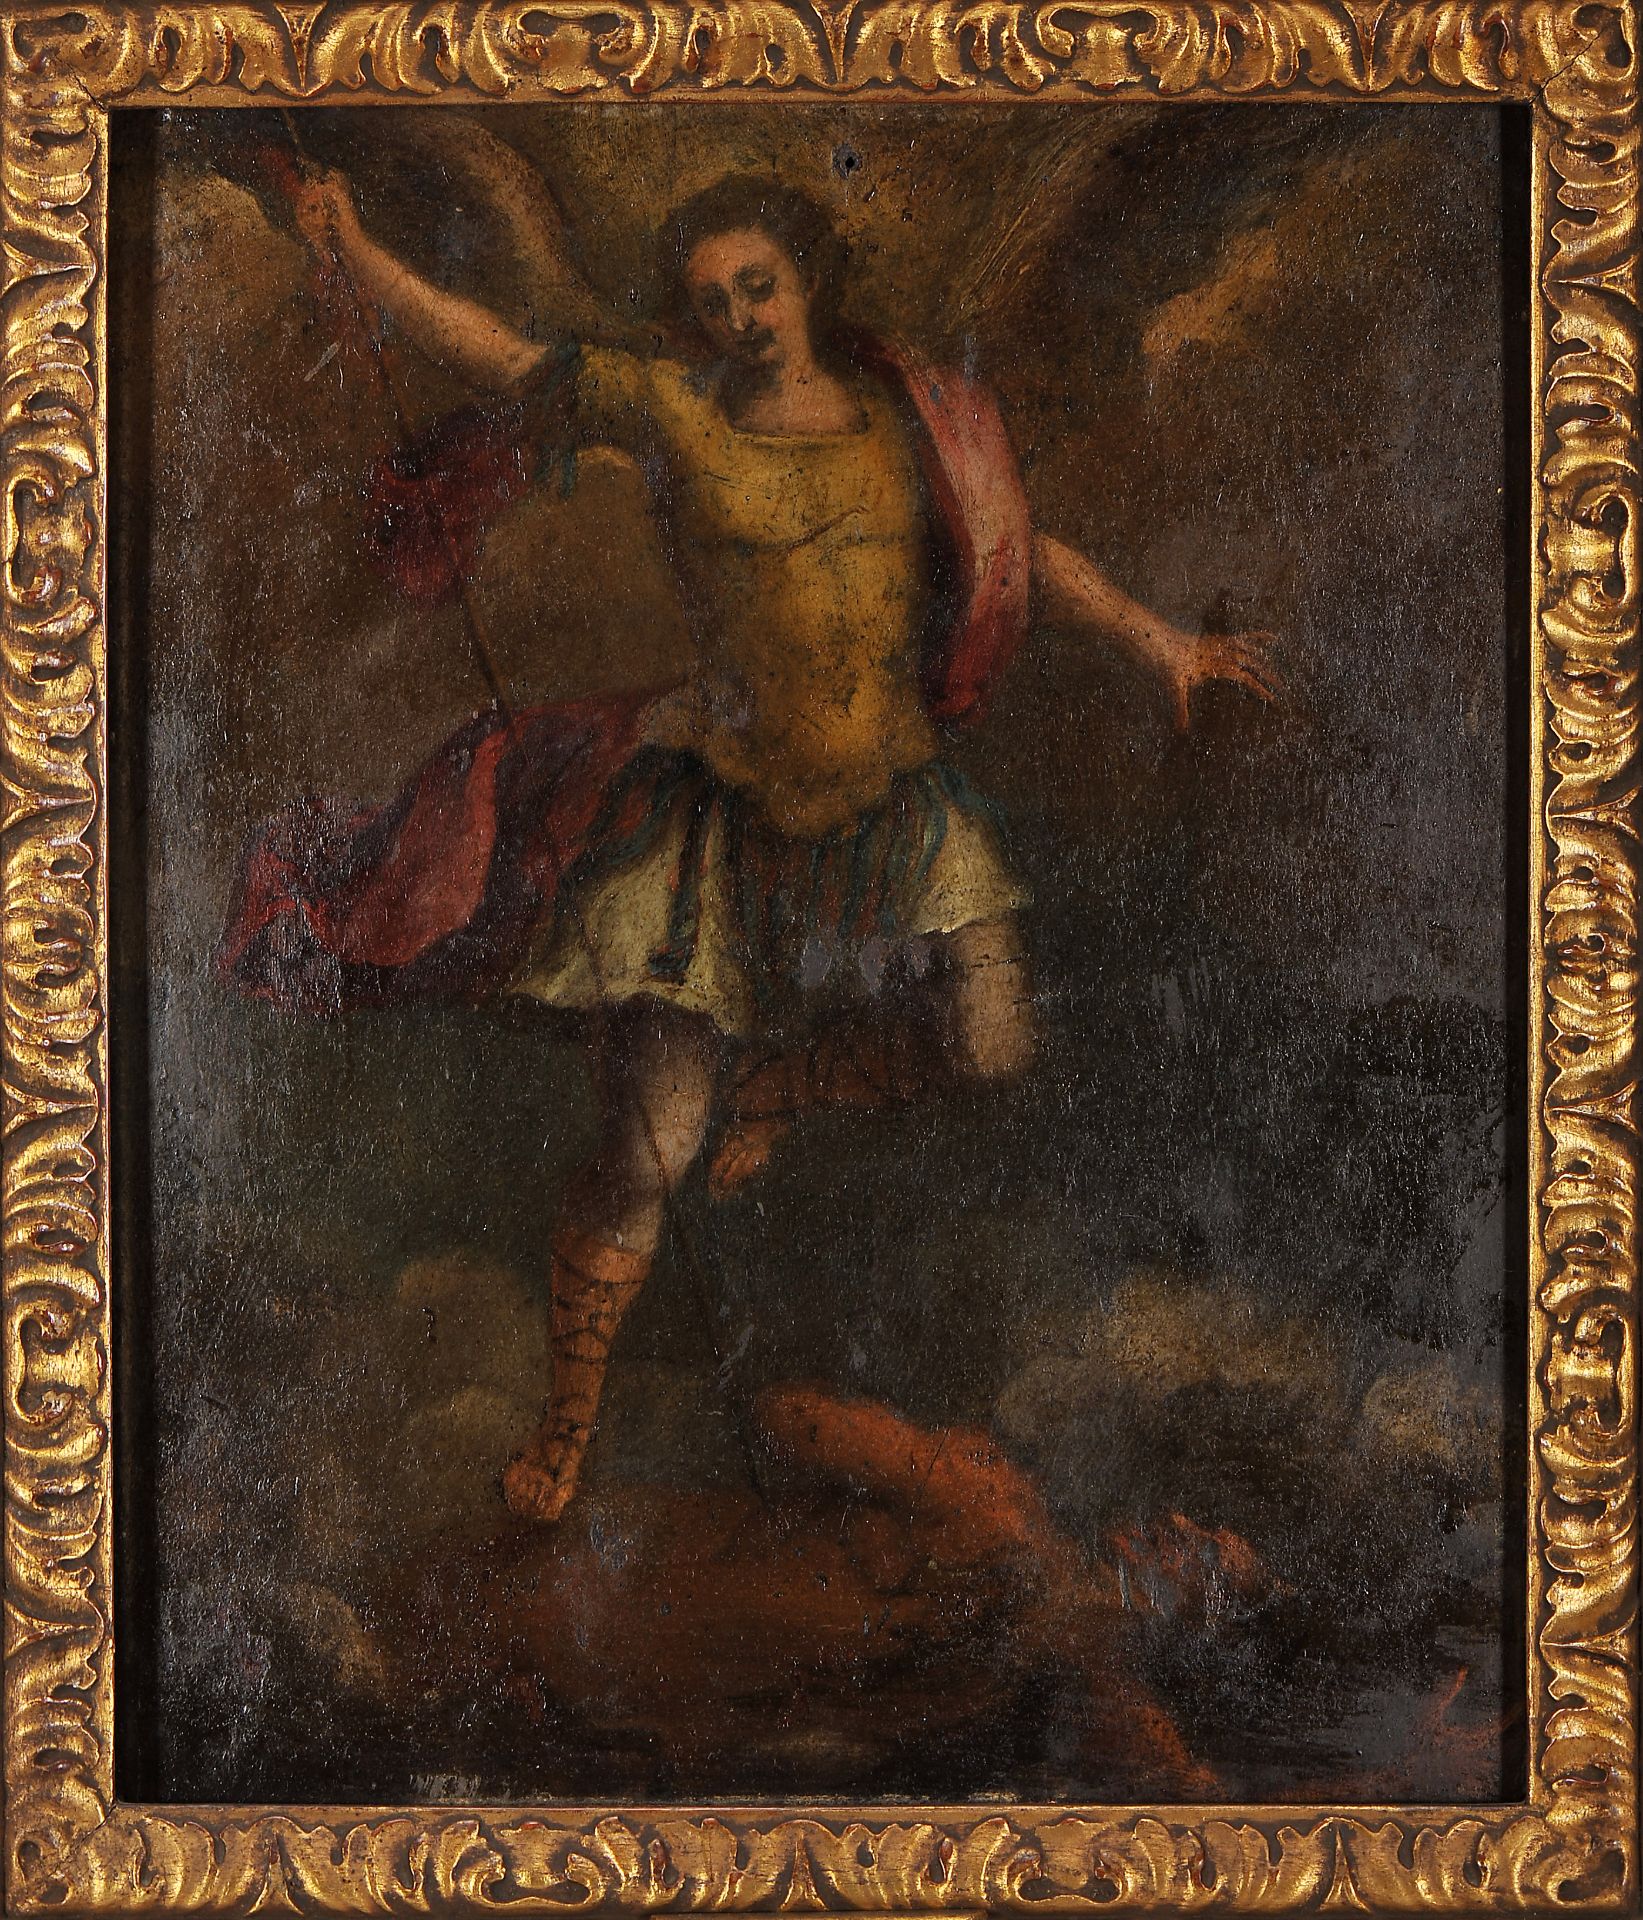 St. Michael the Archangel - Image 3 of 3